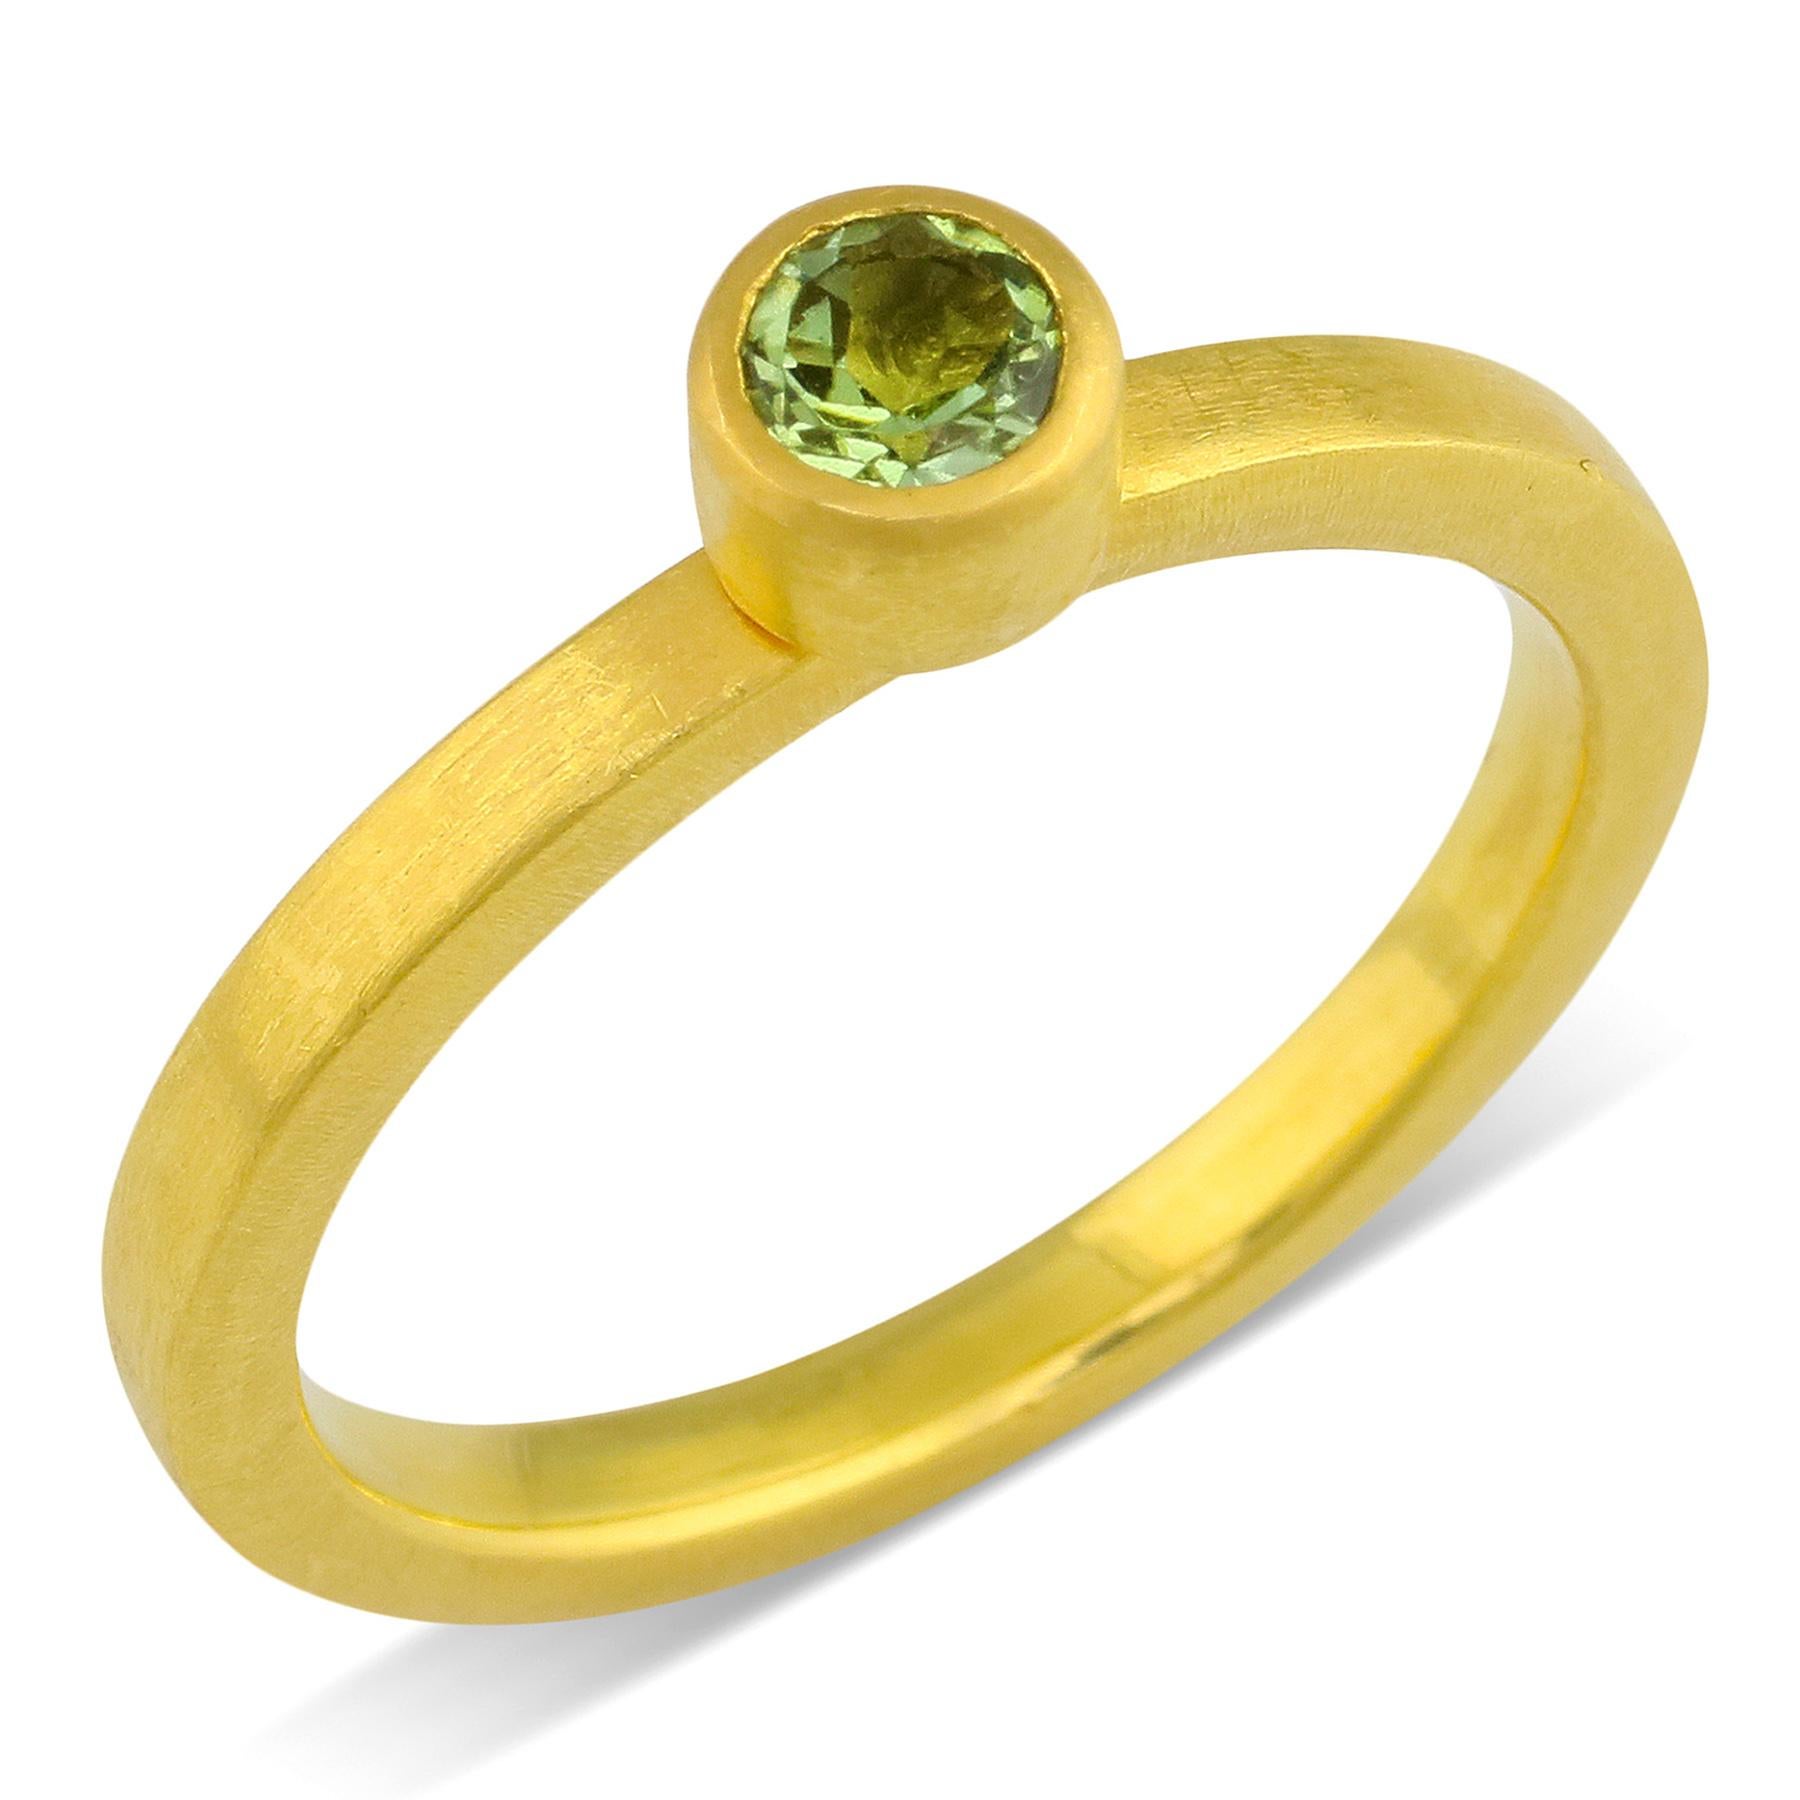 PHILIPPE-SPENCER -   .28 Ct. Faceted Green Tourmaline wrapped in 22K Gold Bezel Setting, with Anvil-Forged Solid 20K Gold 2.25mm x 2mm Band. Heavy Brushed Exterior, Mirror Polish Interior.  Size 6 3/4, and is in-stock and ready to ship. Our